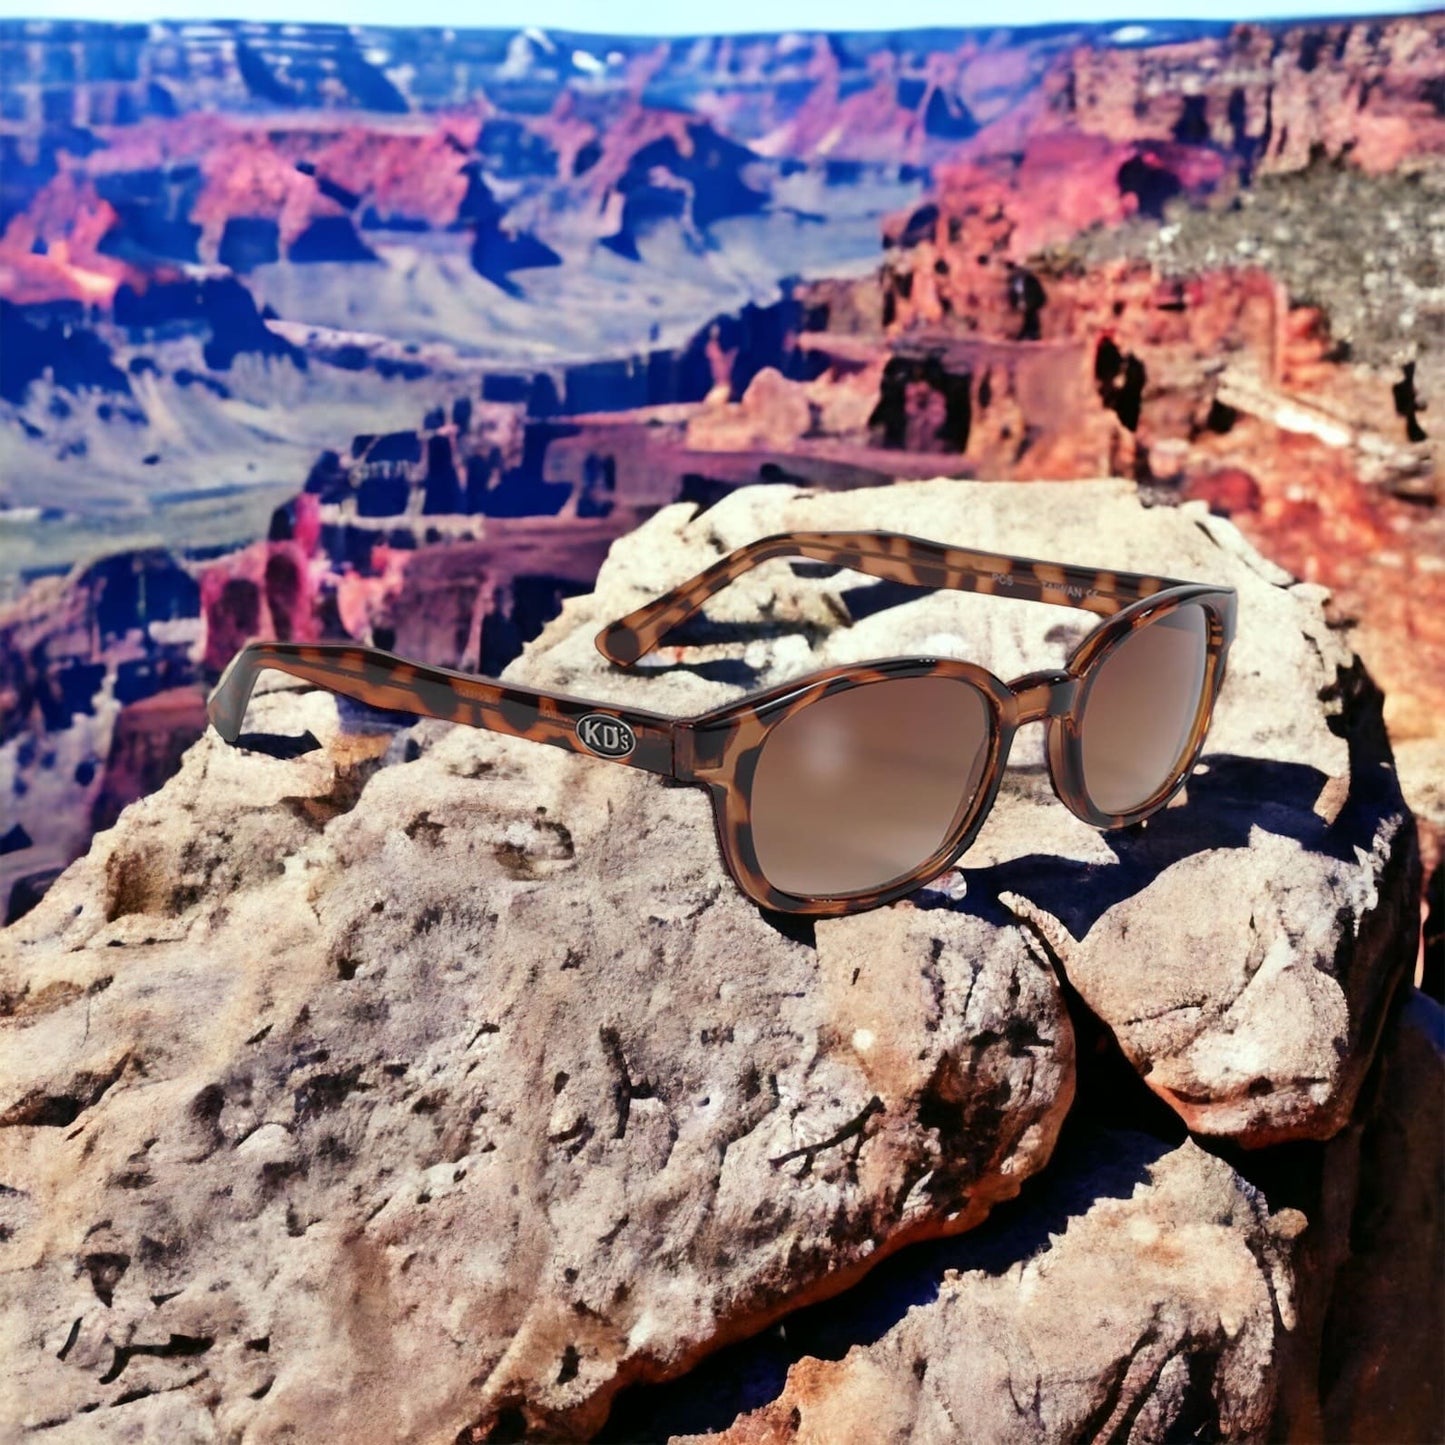 KD's 200 sunglasses with a turtle shell decor frame and amber lenses perched on one of the mountains of the Grand Canyon